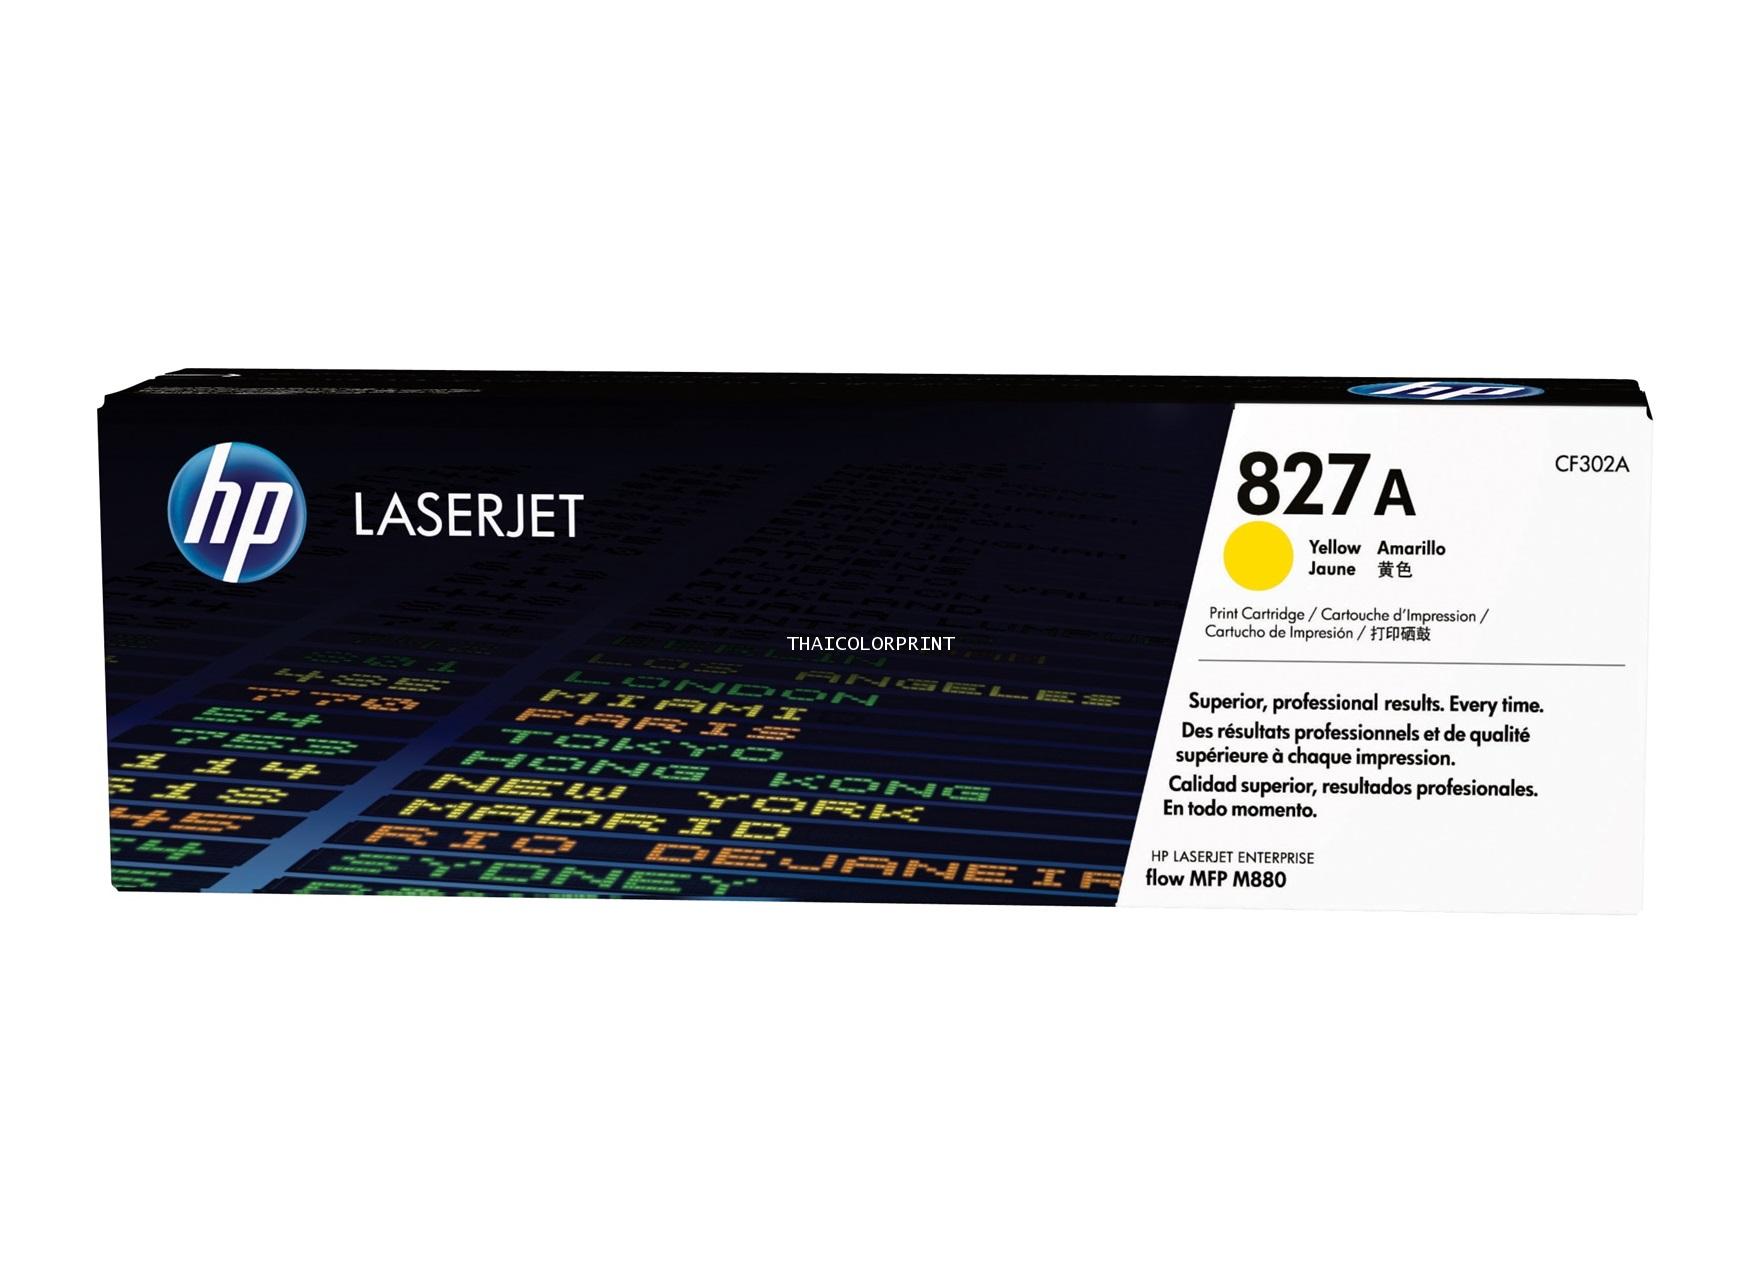 CF302A TONER  FOR HP M880  YELLOW